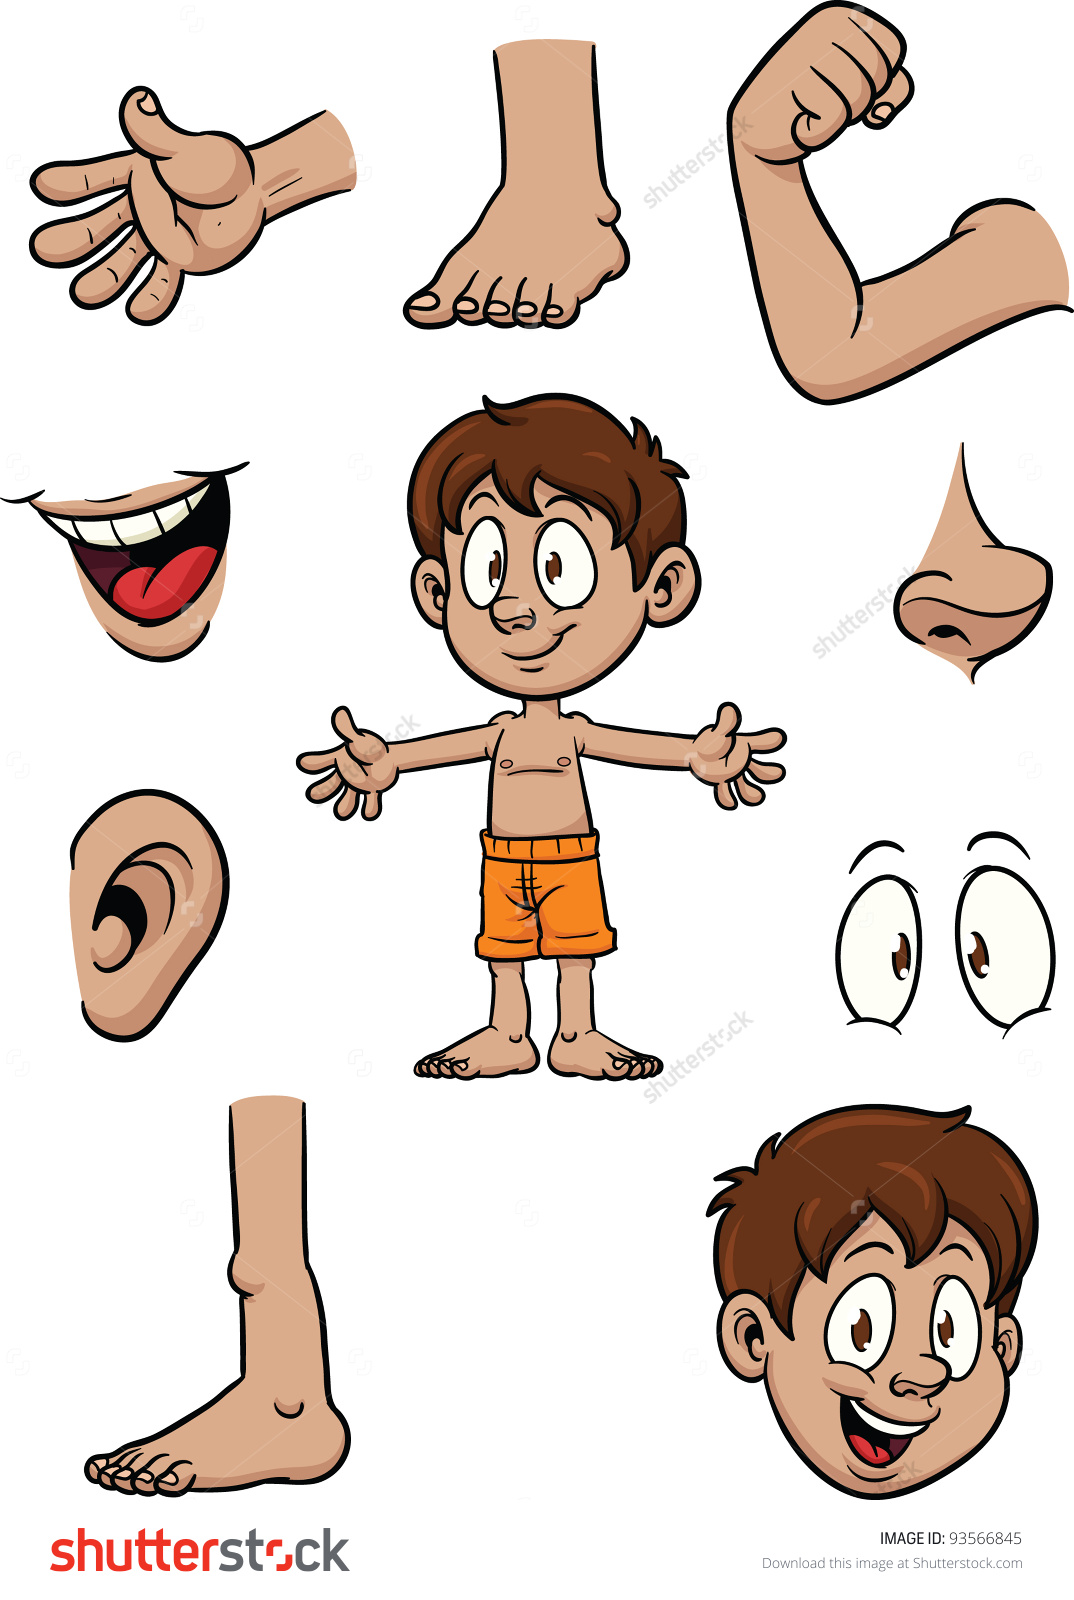 Body parts for kids clipart